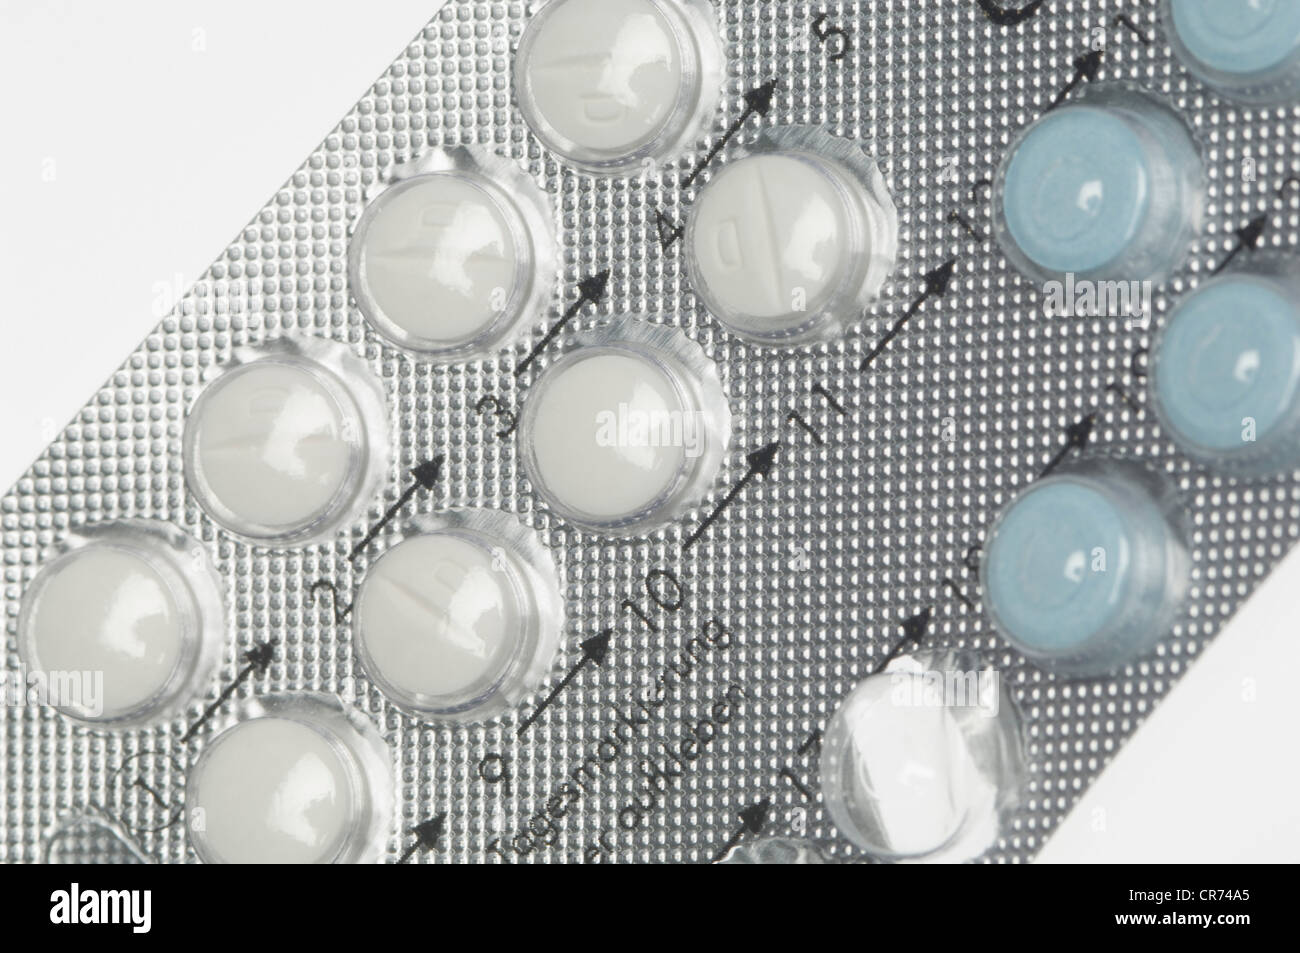 Birth control pills against white background Stock Photo